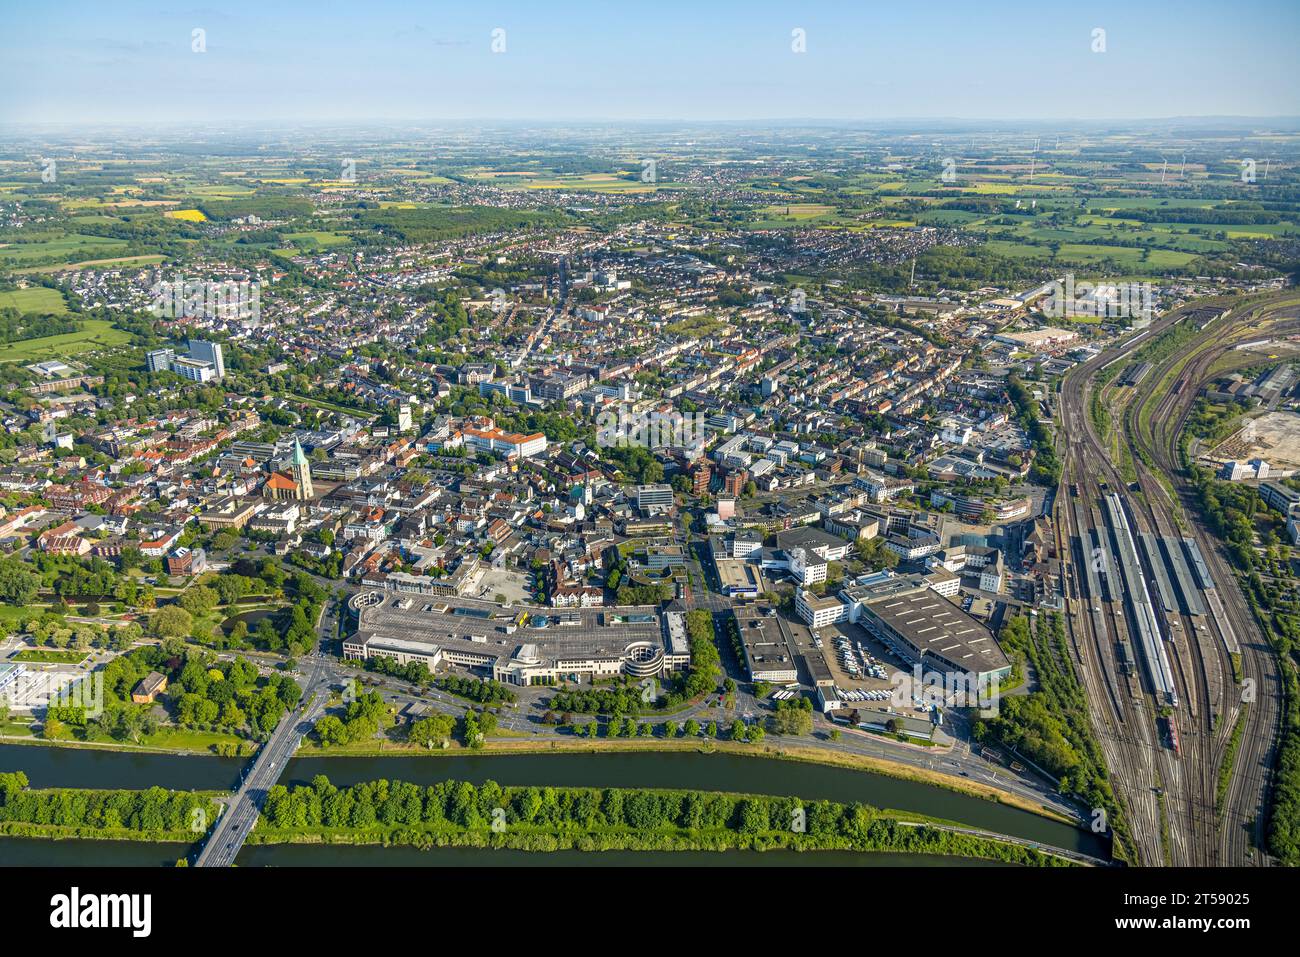 Aerial view, city center view, central station, Allee-Center, evang. Pauluskirche, St. Marien-Hospital, Mitte, Hamm, Ruhr area, North Rhine-Westphalia Stock Photo